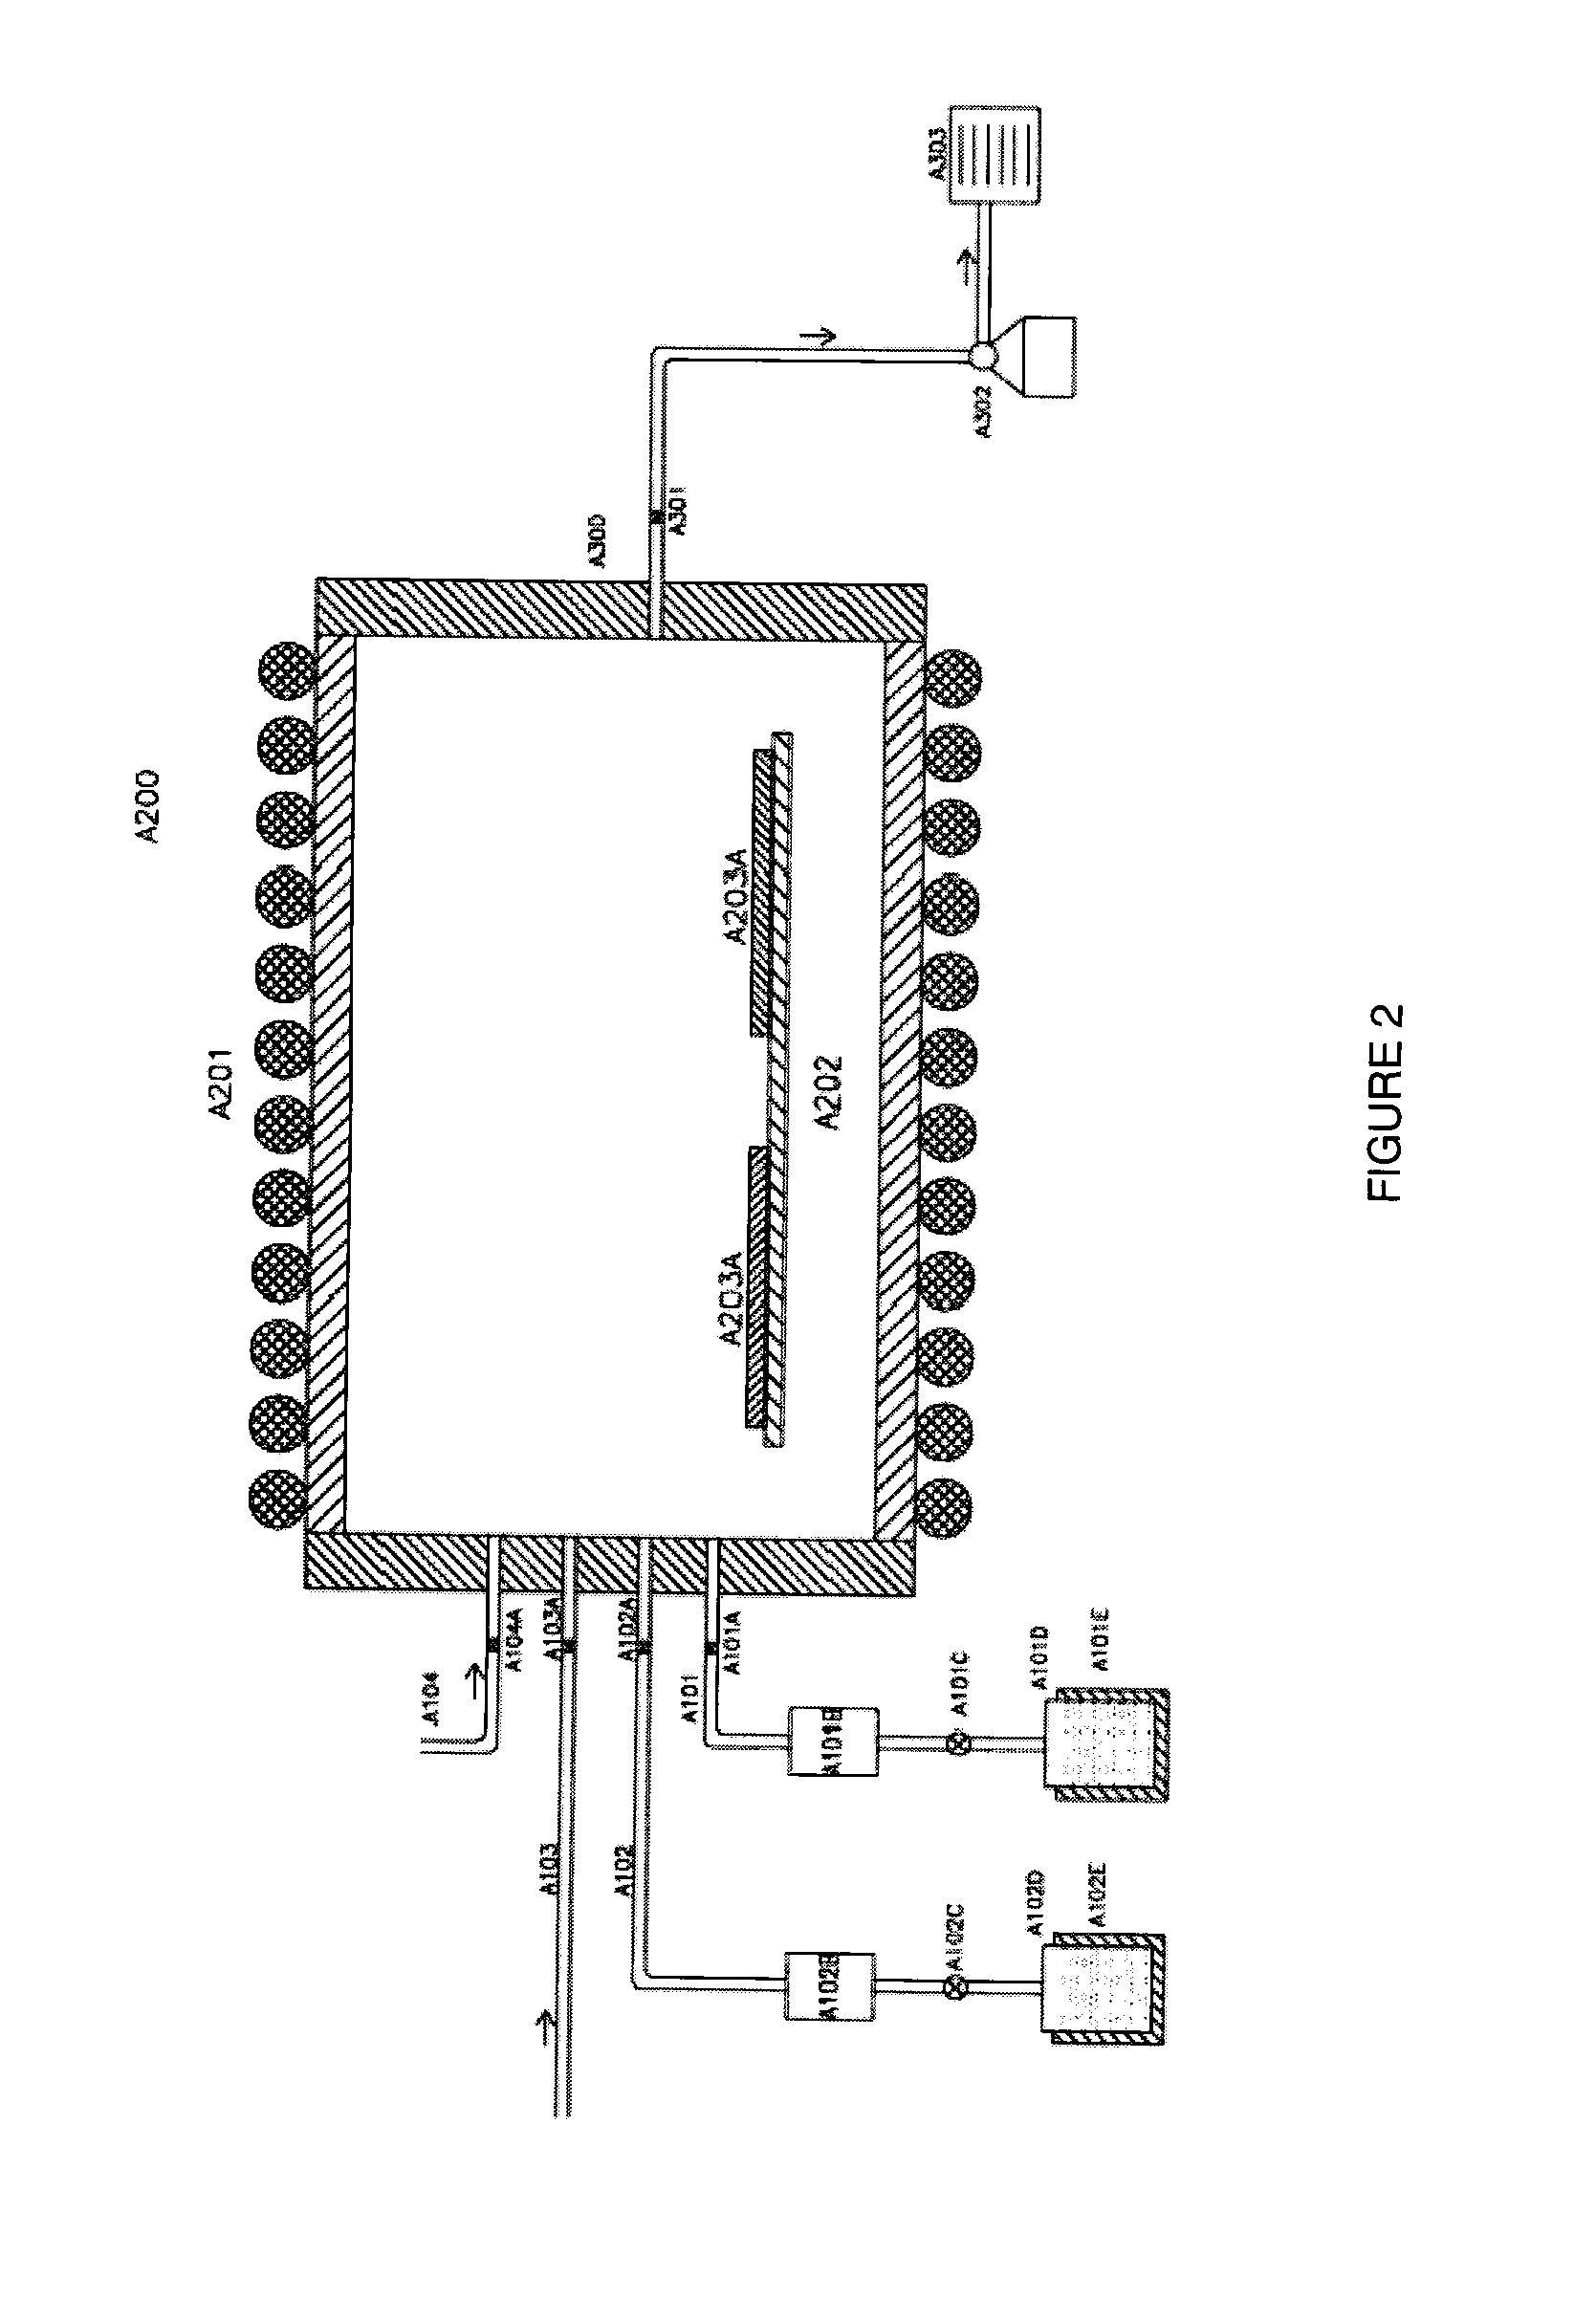 Methods for depositing silicon dioxide or silicon oxide films using aminovinylsilanes